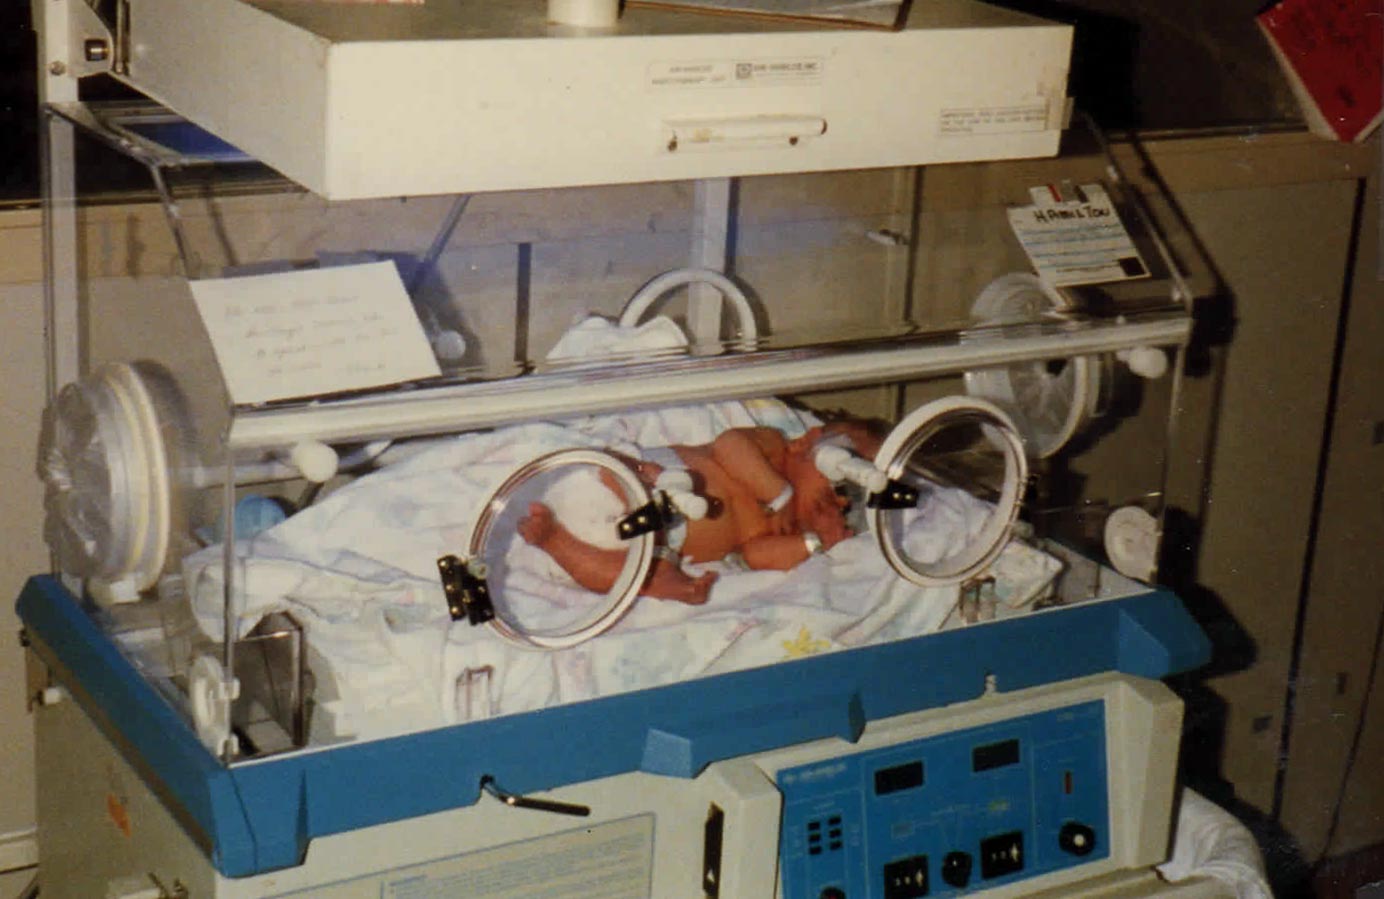  Here is this 4 lb 10 oz baby who was born with medical needs, lying in an incubator, who needed this liquid gold called Mother's Milk but I couldn't produce enough to provide for one feeding let alone the months that lay ahead. 